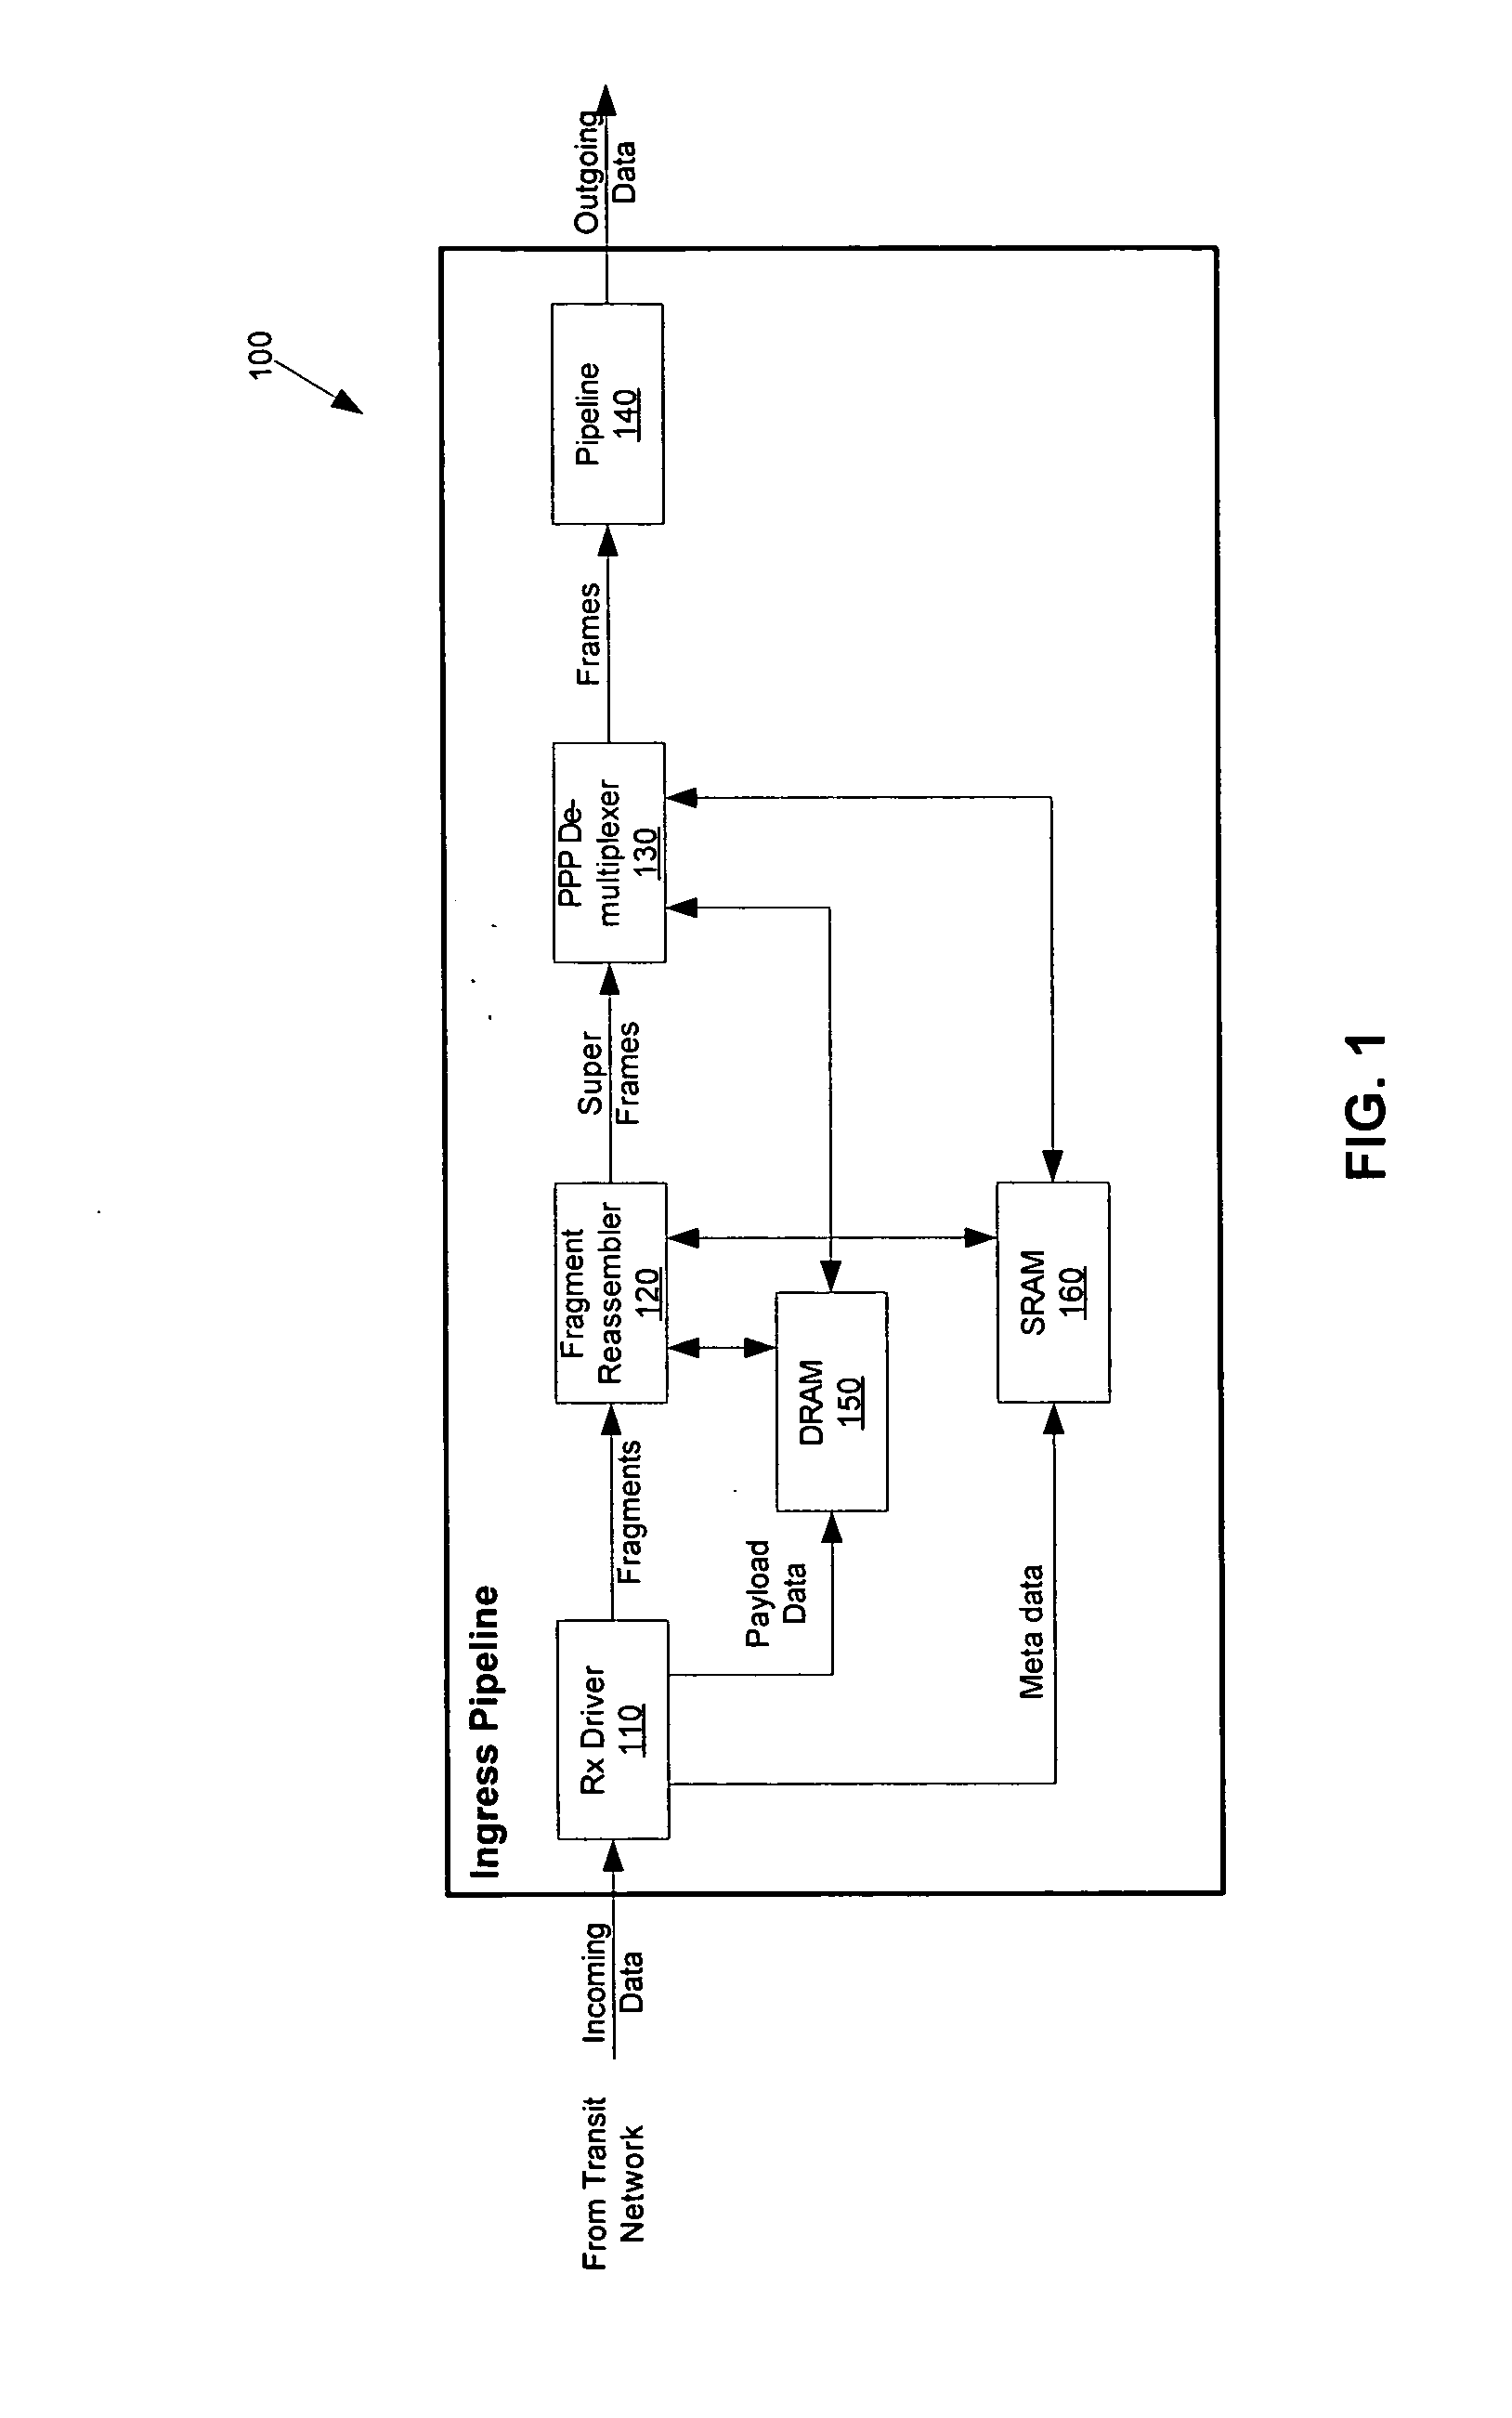 Method and system for providing data communications over a multi-link channel